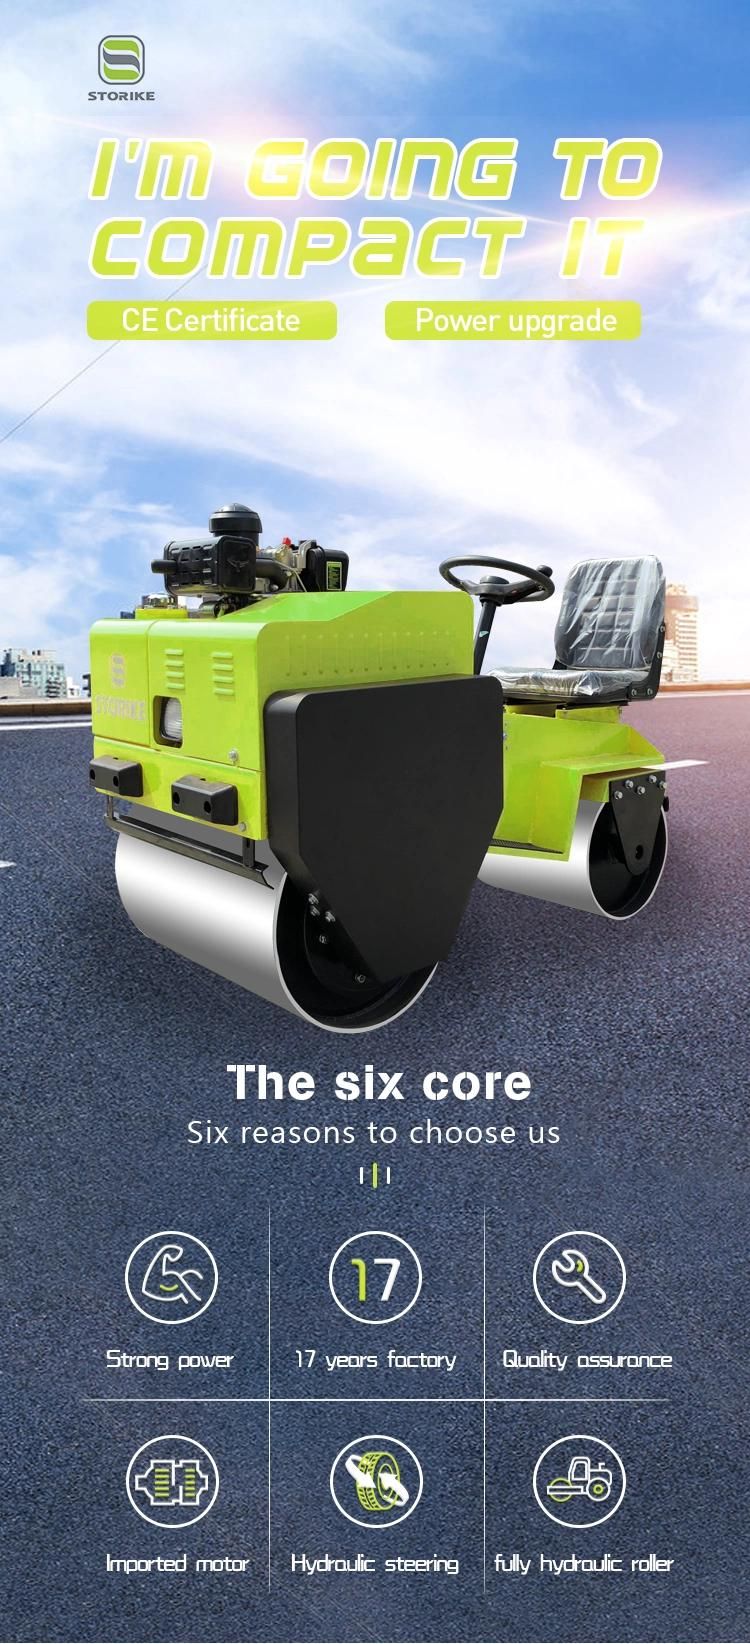 800kg Cheap Price Diesel Gasoline Power Vibratory Roller Compactor Europe